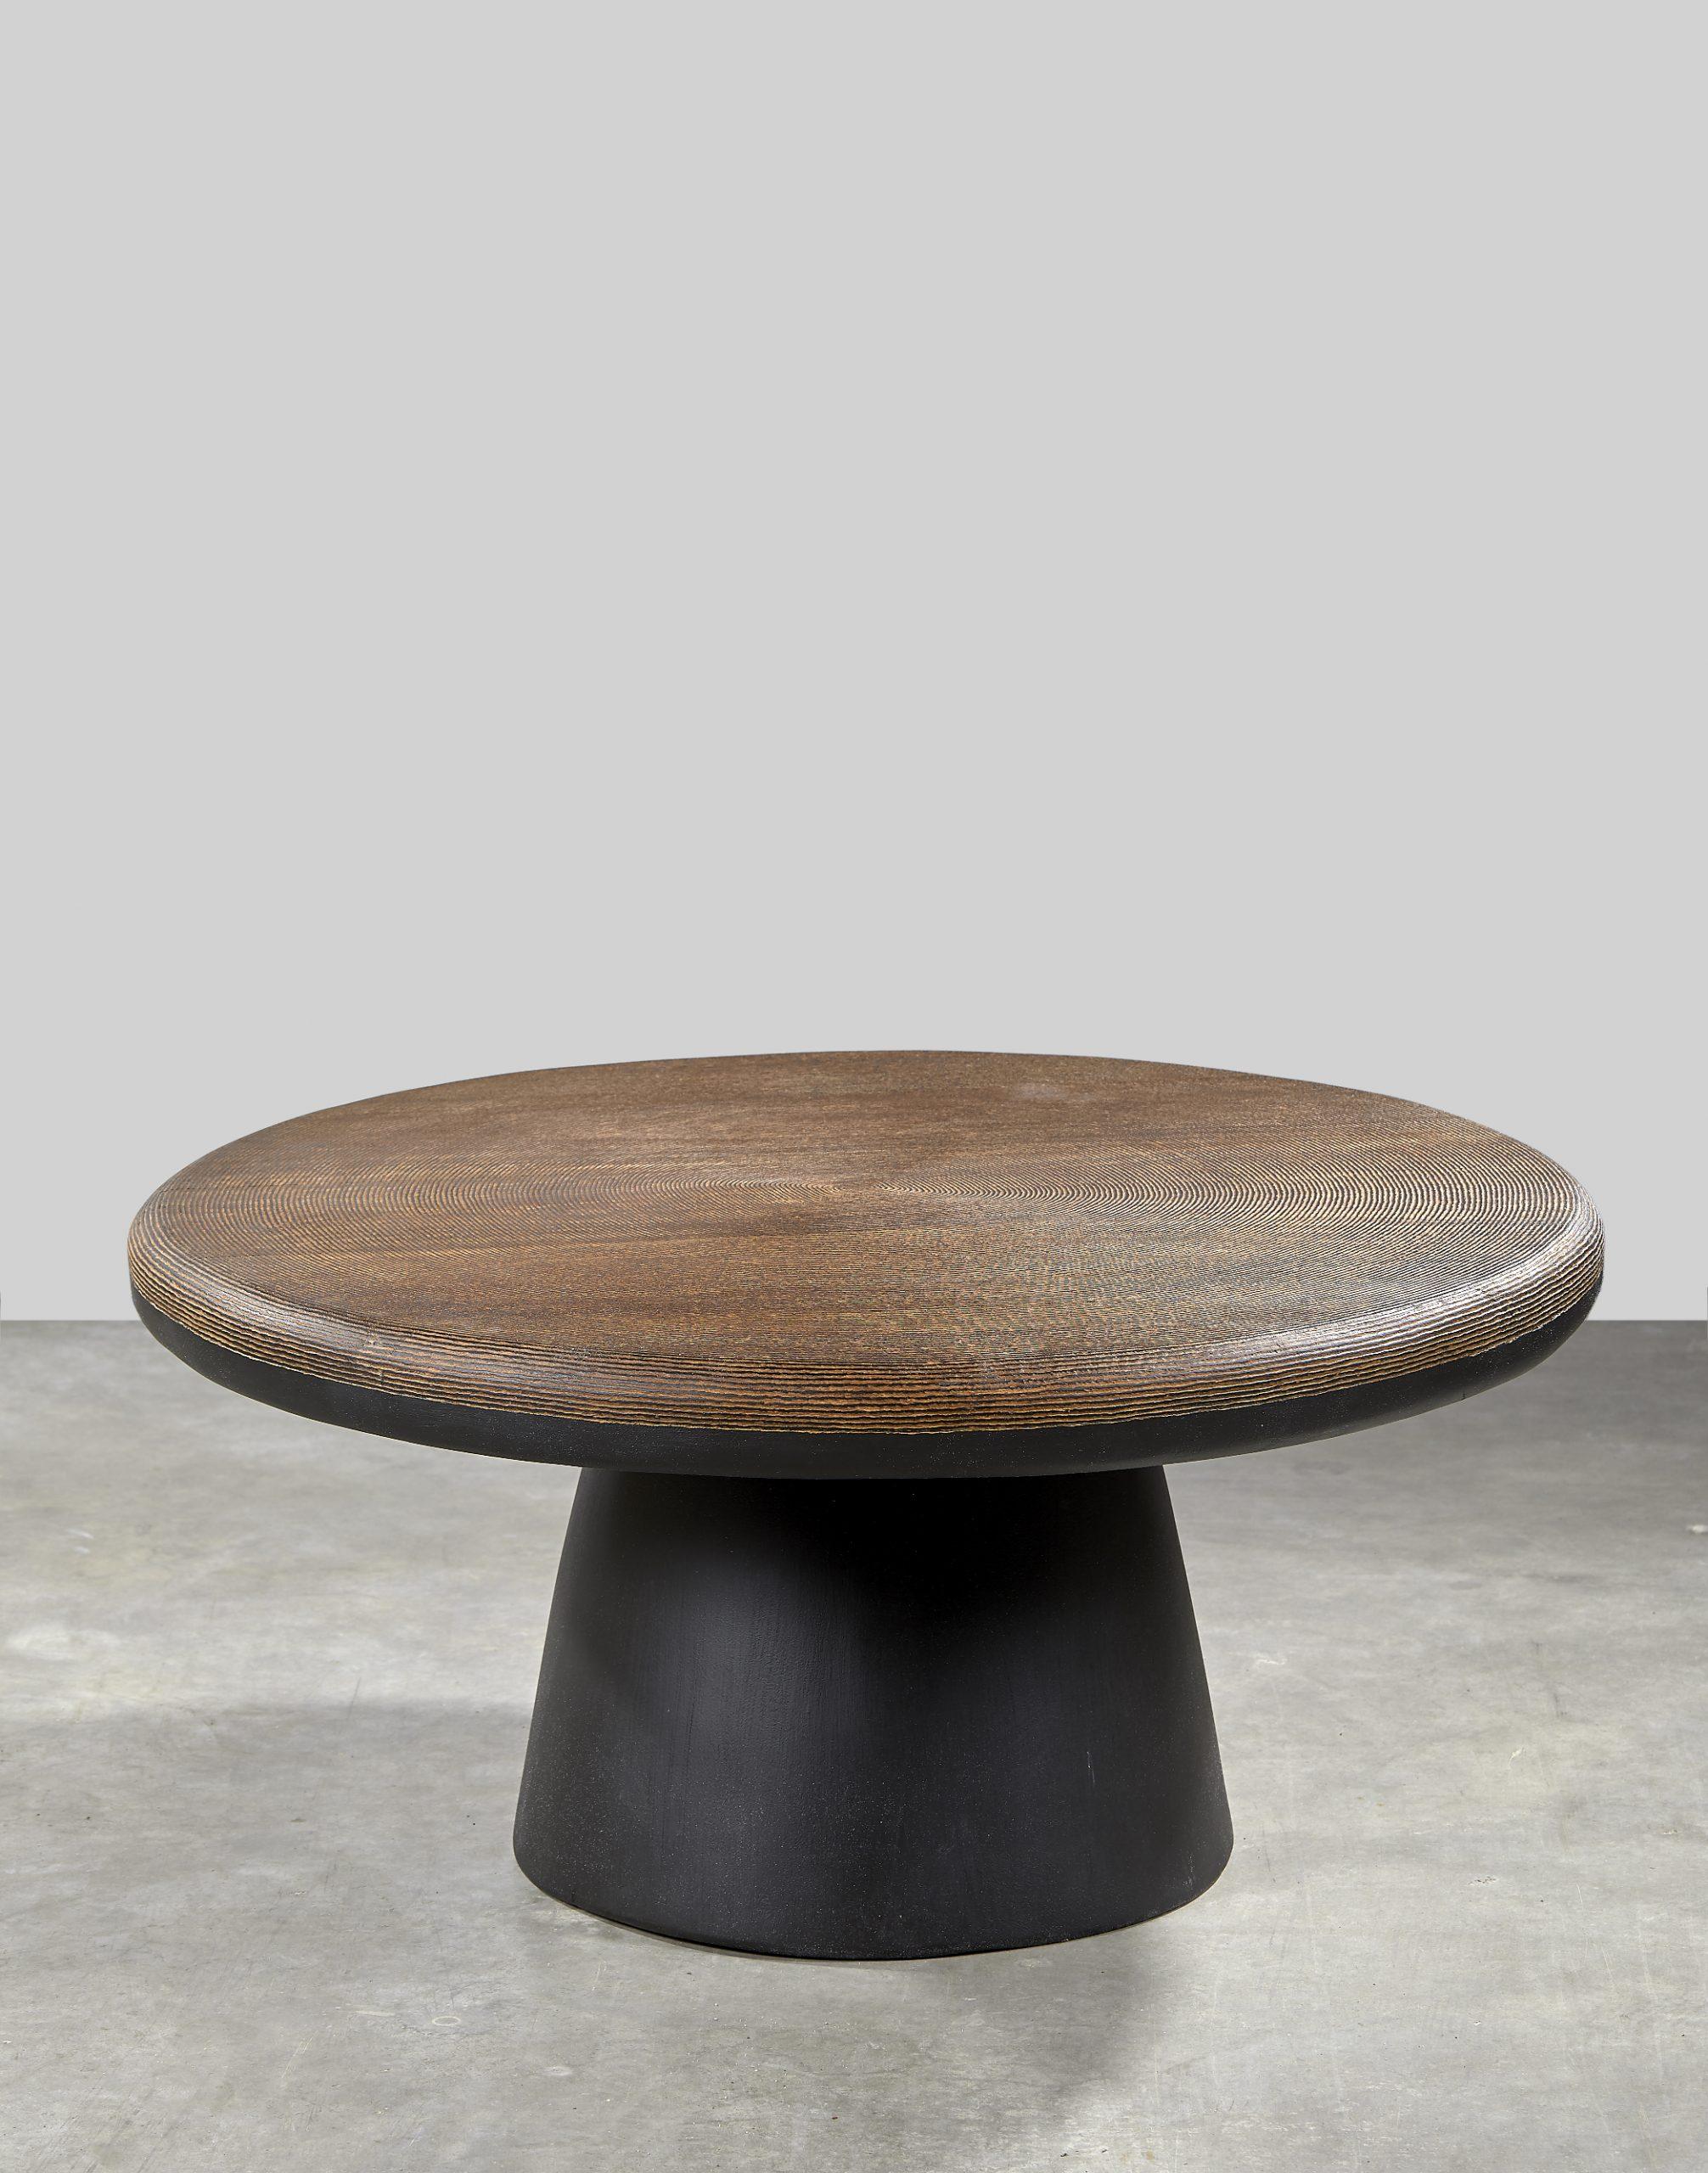 Layou coffee table 
Dimensions: Diameter 90 cm / Height 35 cm
Materials: Dimb wood (exotic African wood) with hand carved top.
Legs carved from the tree trunk.
Each edition of the Layou coffee table is a unique piece

Over the years, Papa Mamadou